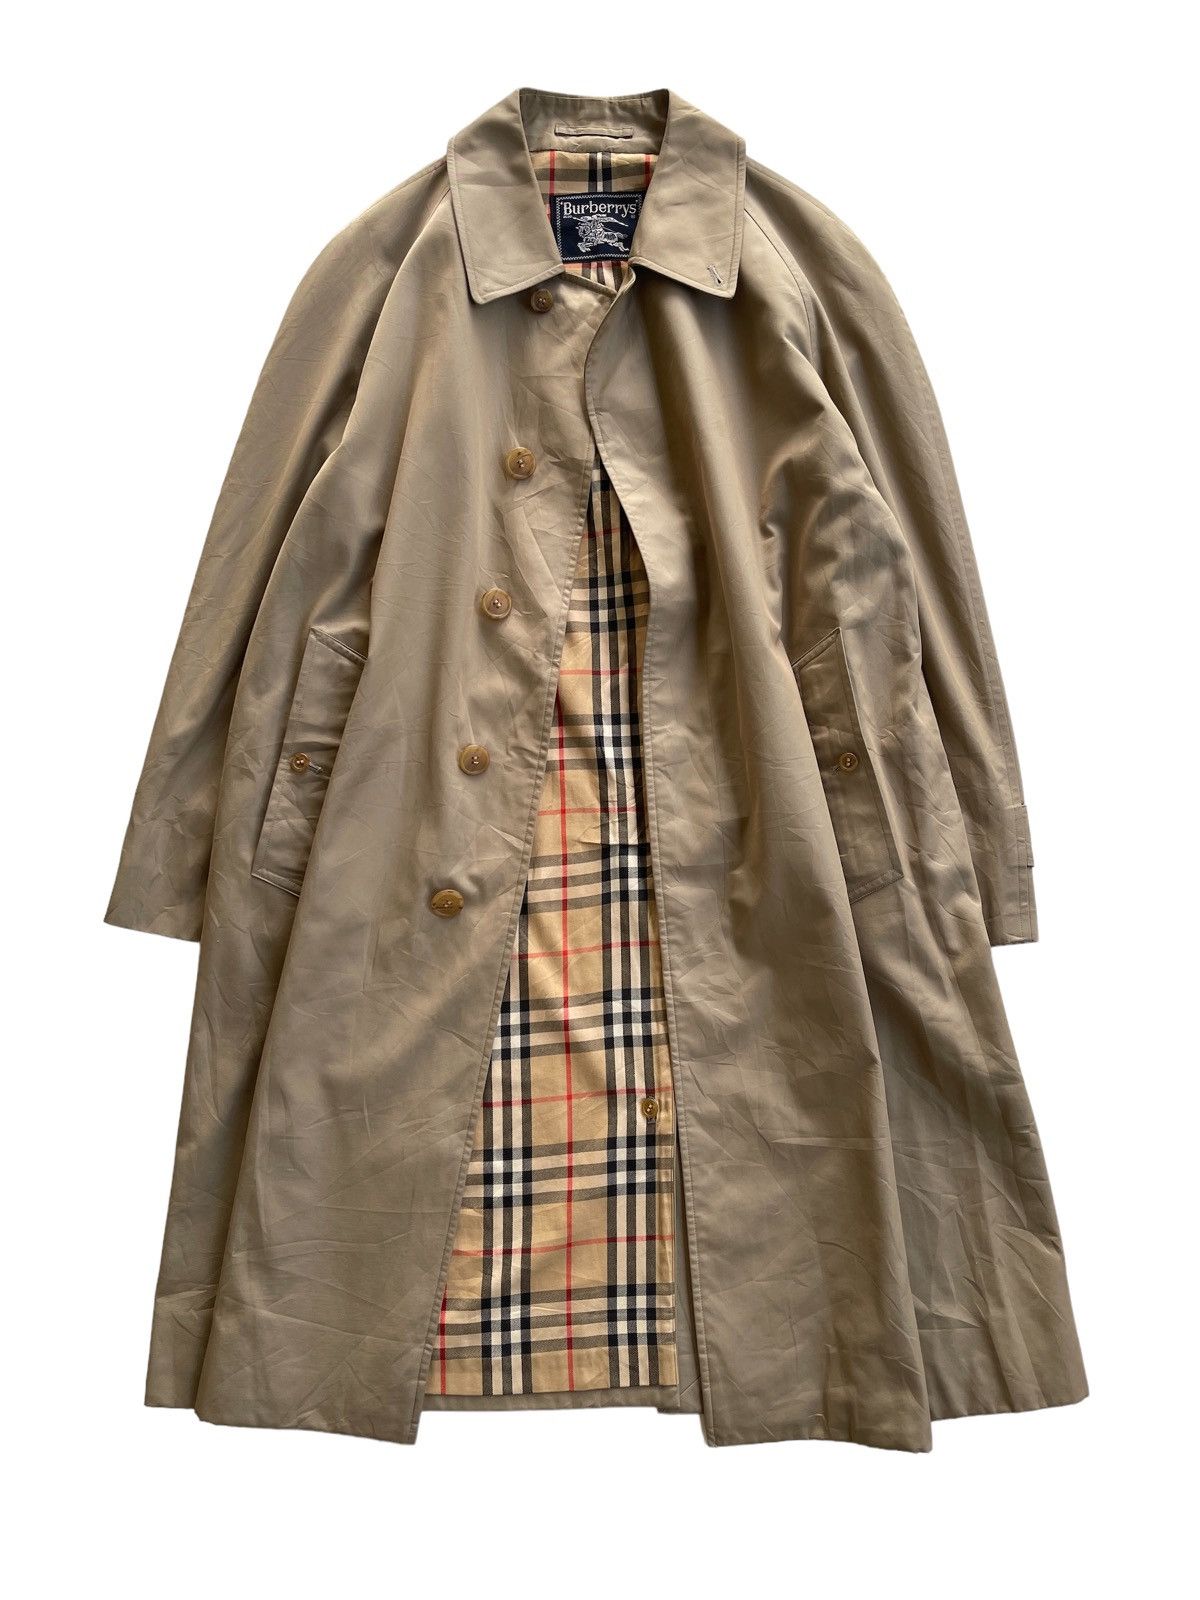 Burberry Prorsum Vintage Burberrys Checked Trench Coat | Grailed